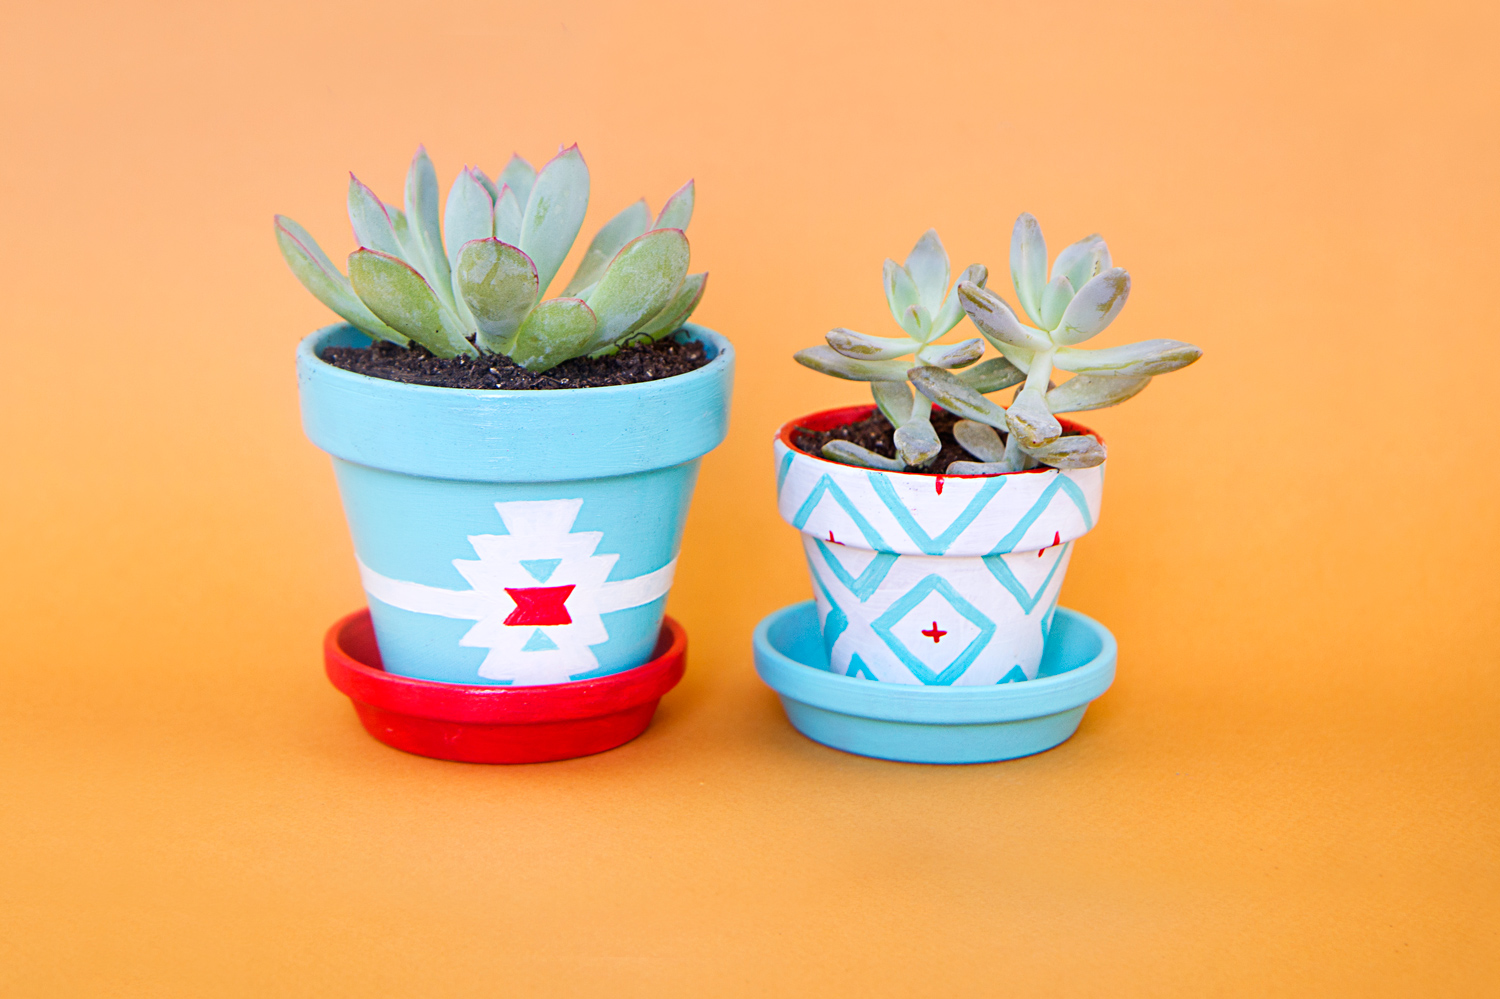 Little navajo style for your succulents!